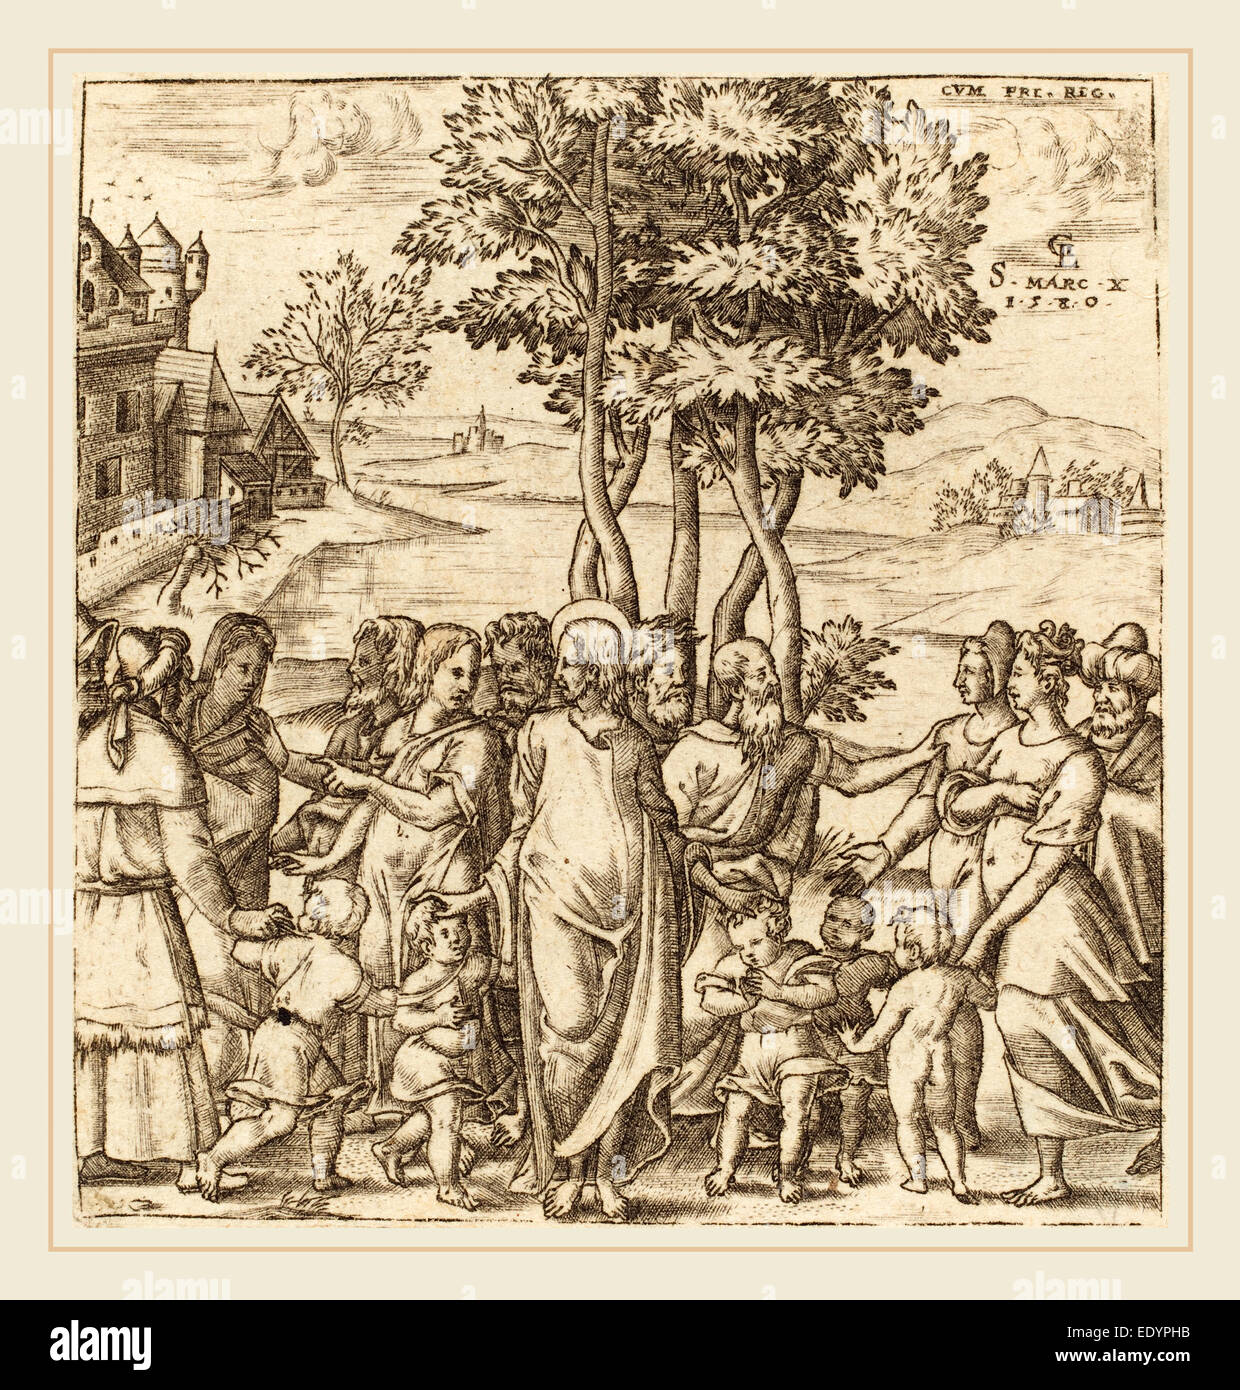 Léonard Gaultier, French (1561-1641), Christ Blesses the Children, probably c. 1576-1580, engraving Stock Photo